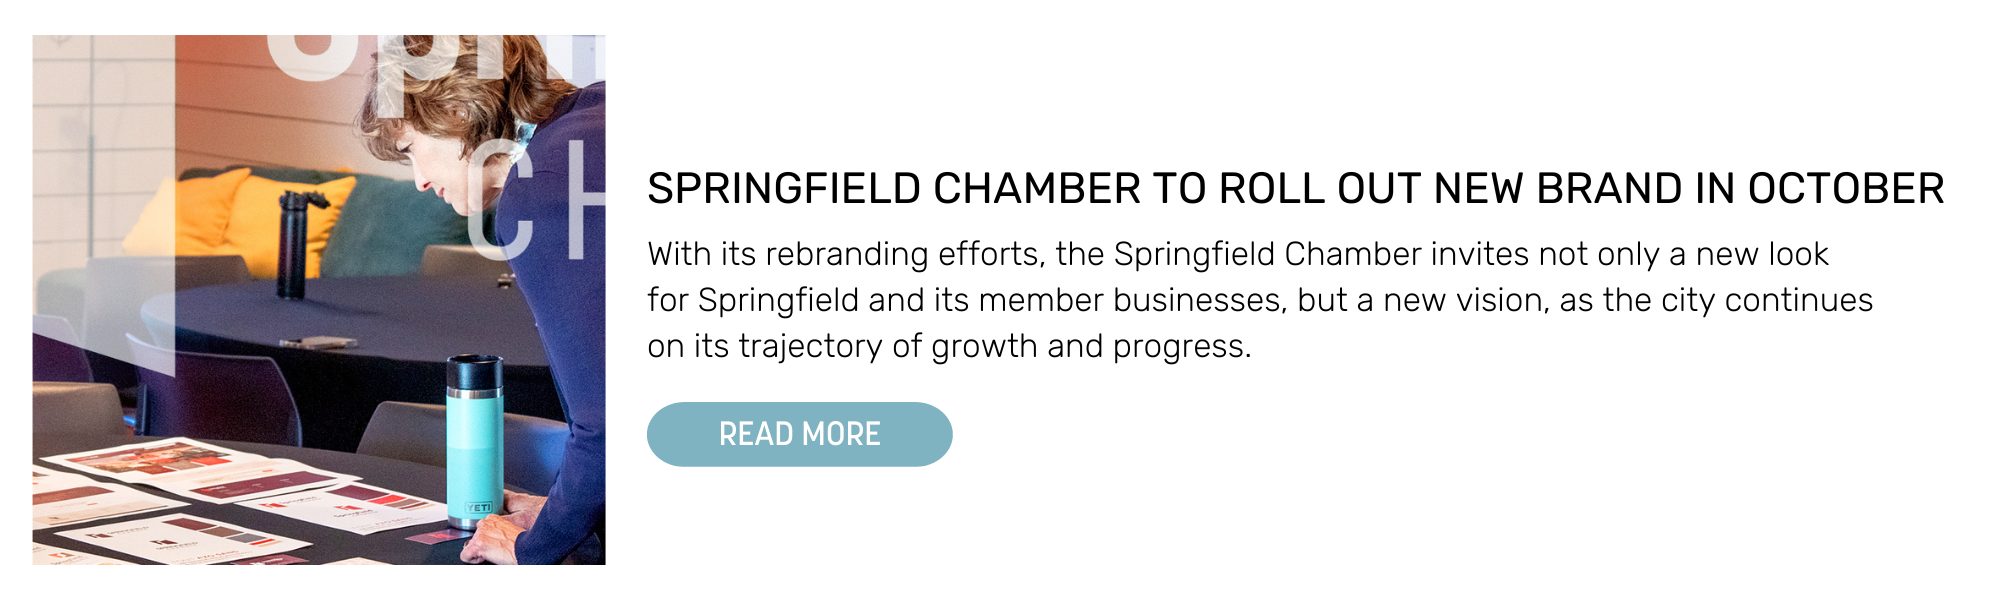 SPRINGFIELD CHAMBER TO ROLL OUT NEW BRAND IN OCTOBER